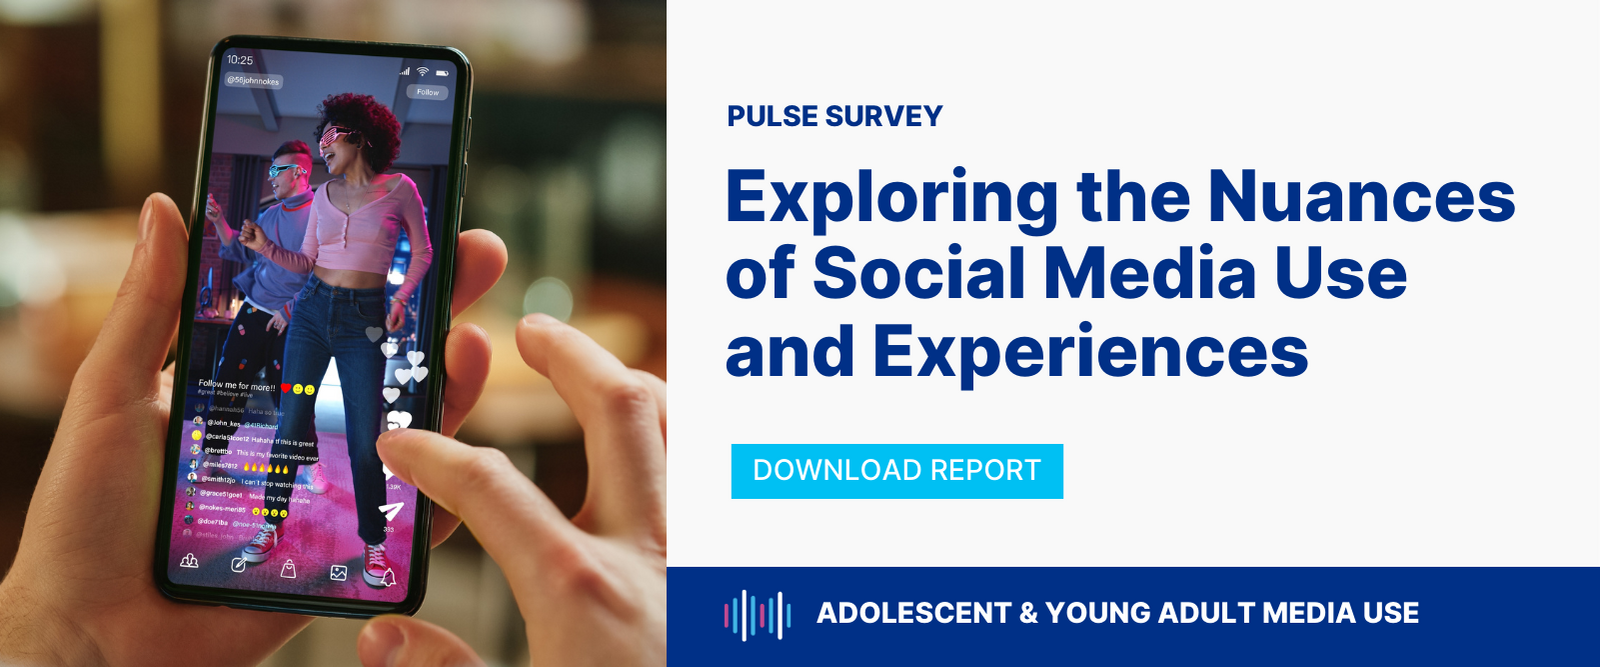 Pulse Survey - Exploring the nuances of social media use and experiences